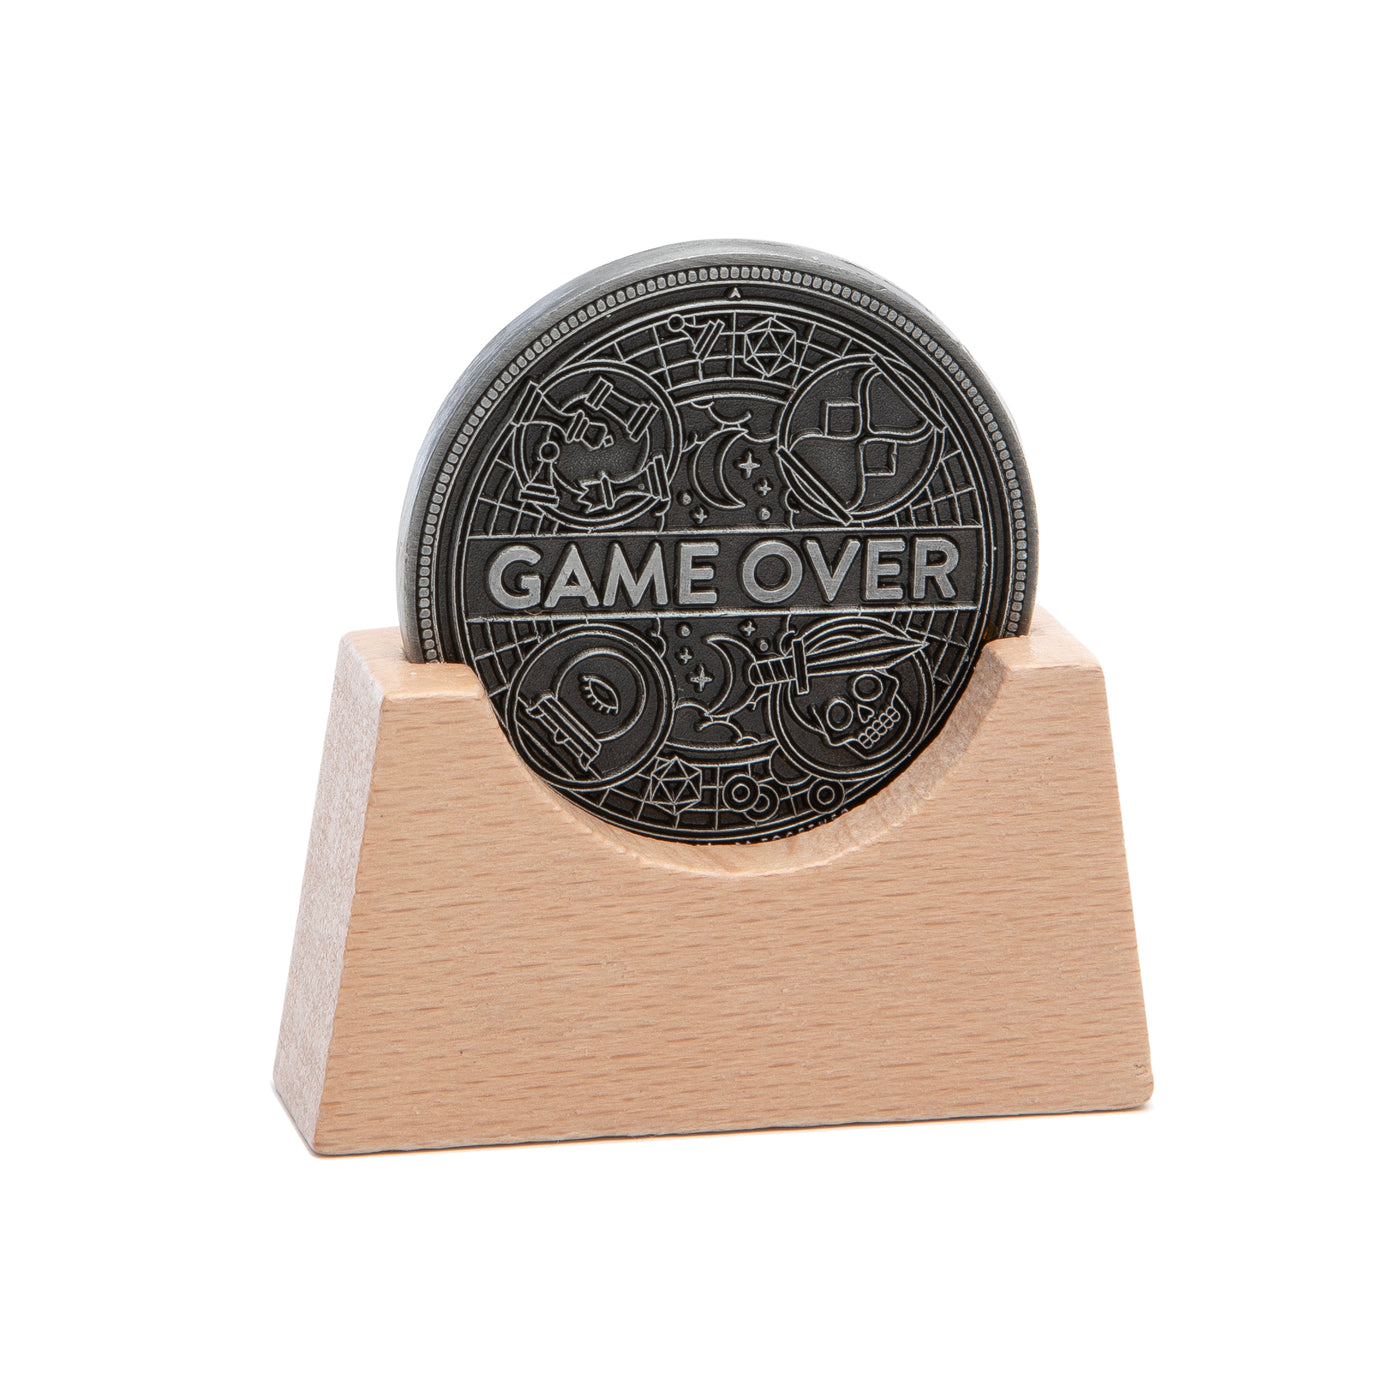 Coin displaying "Gave Over" in a wood stand